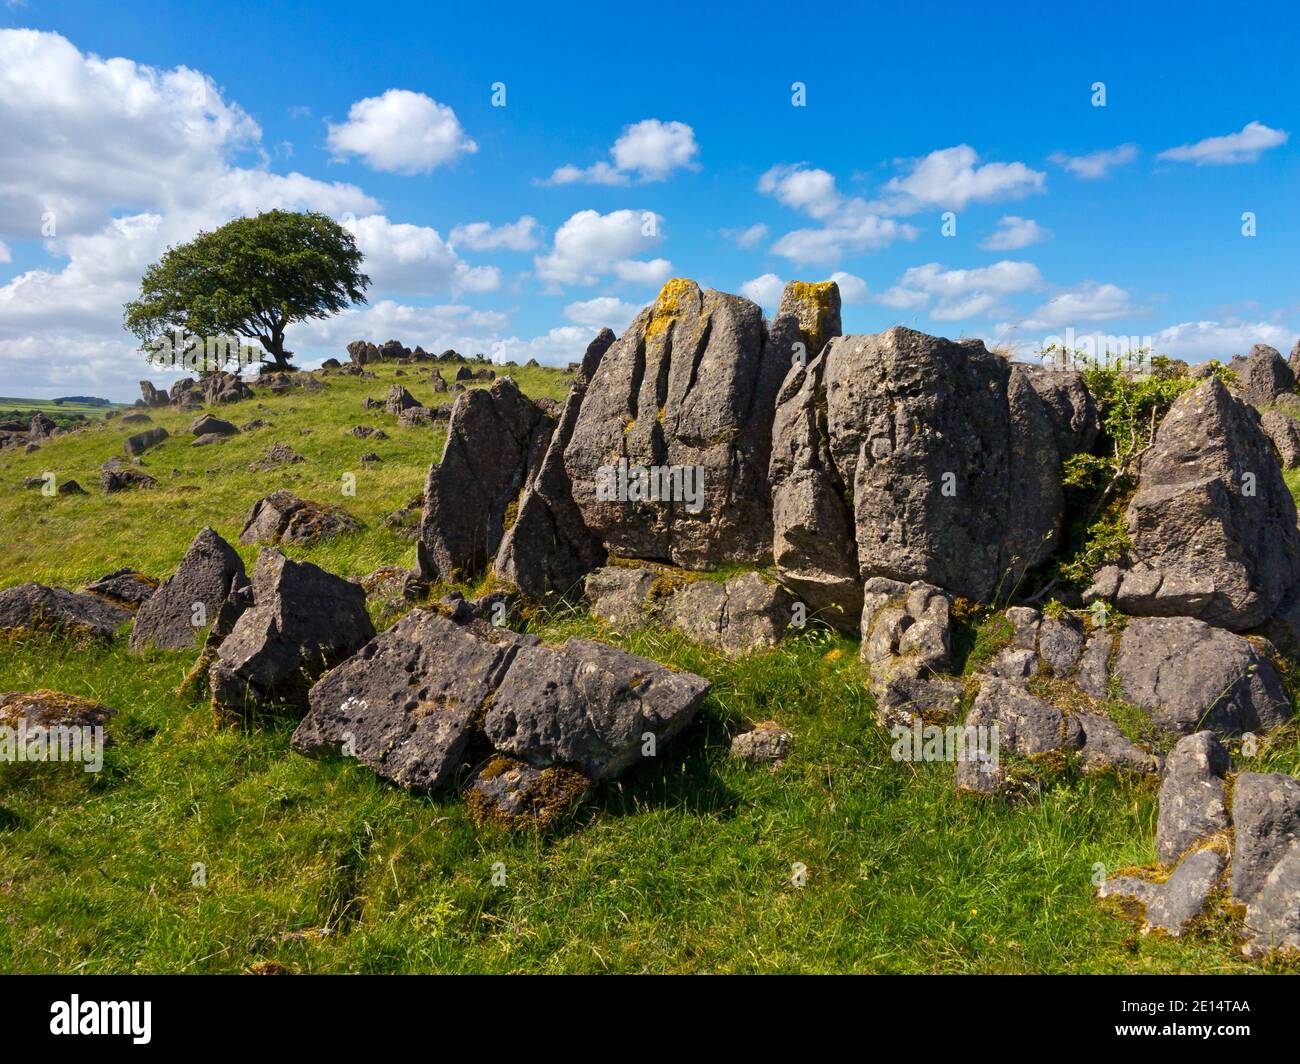 Limestone rocks and tree at Roystone Rocks near Parwich in the Peak District National Park Derbyshire Dales England UK Stock Photo